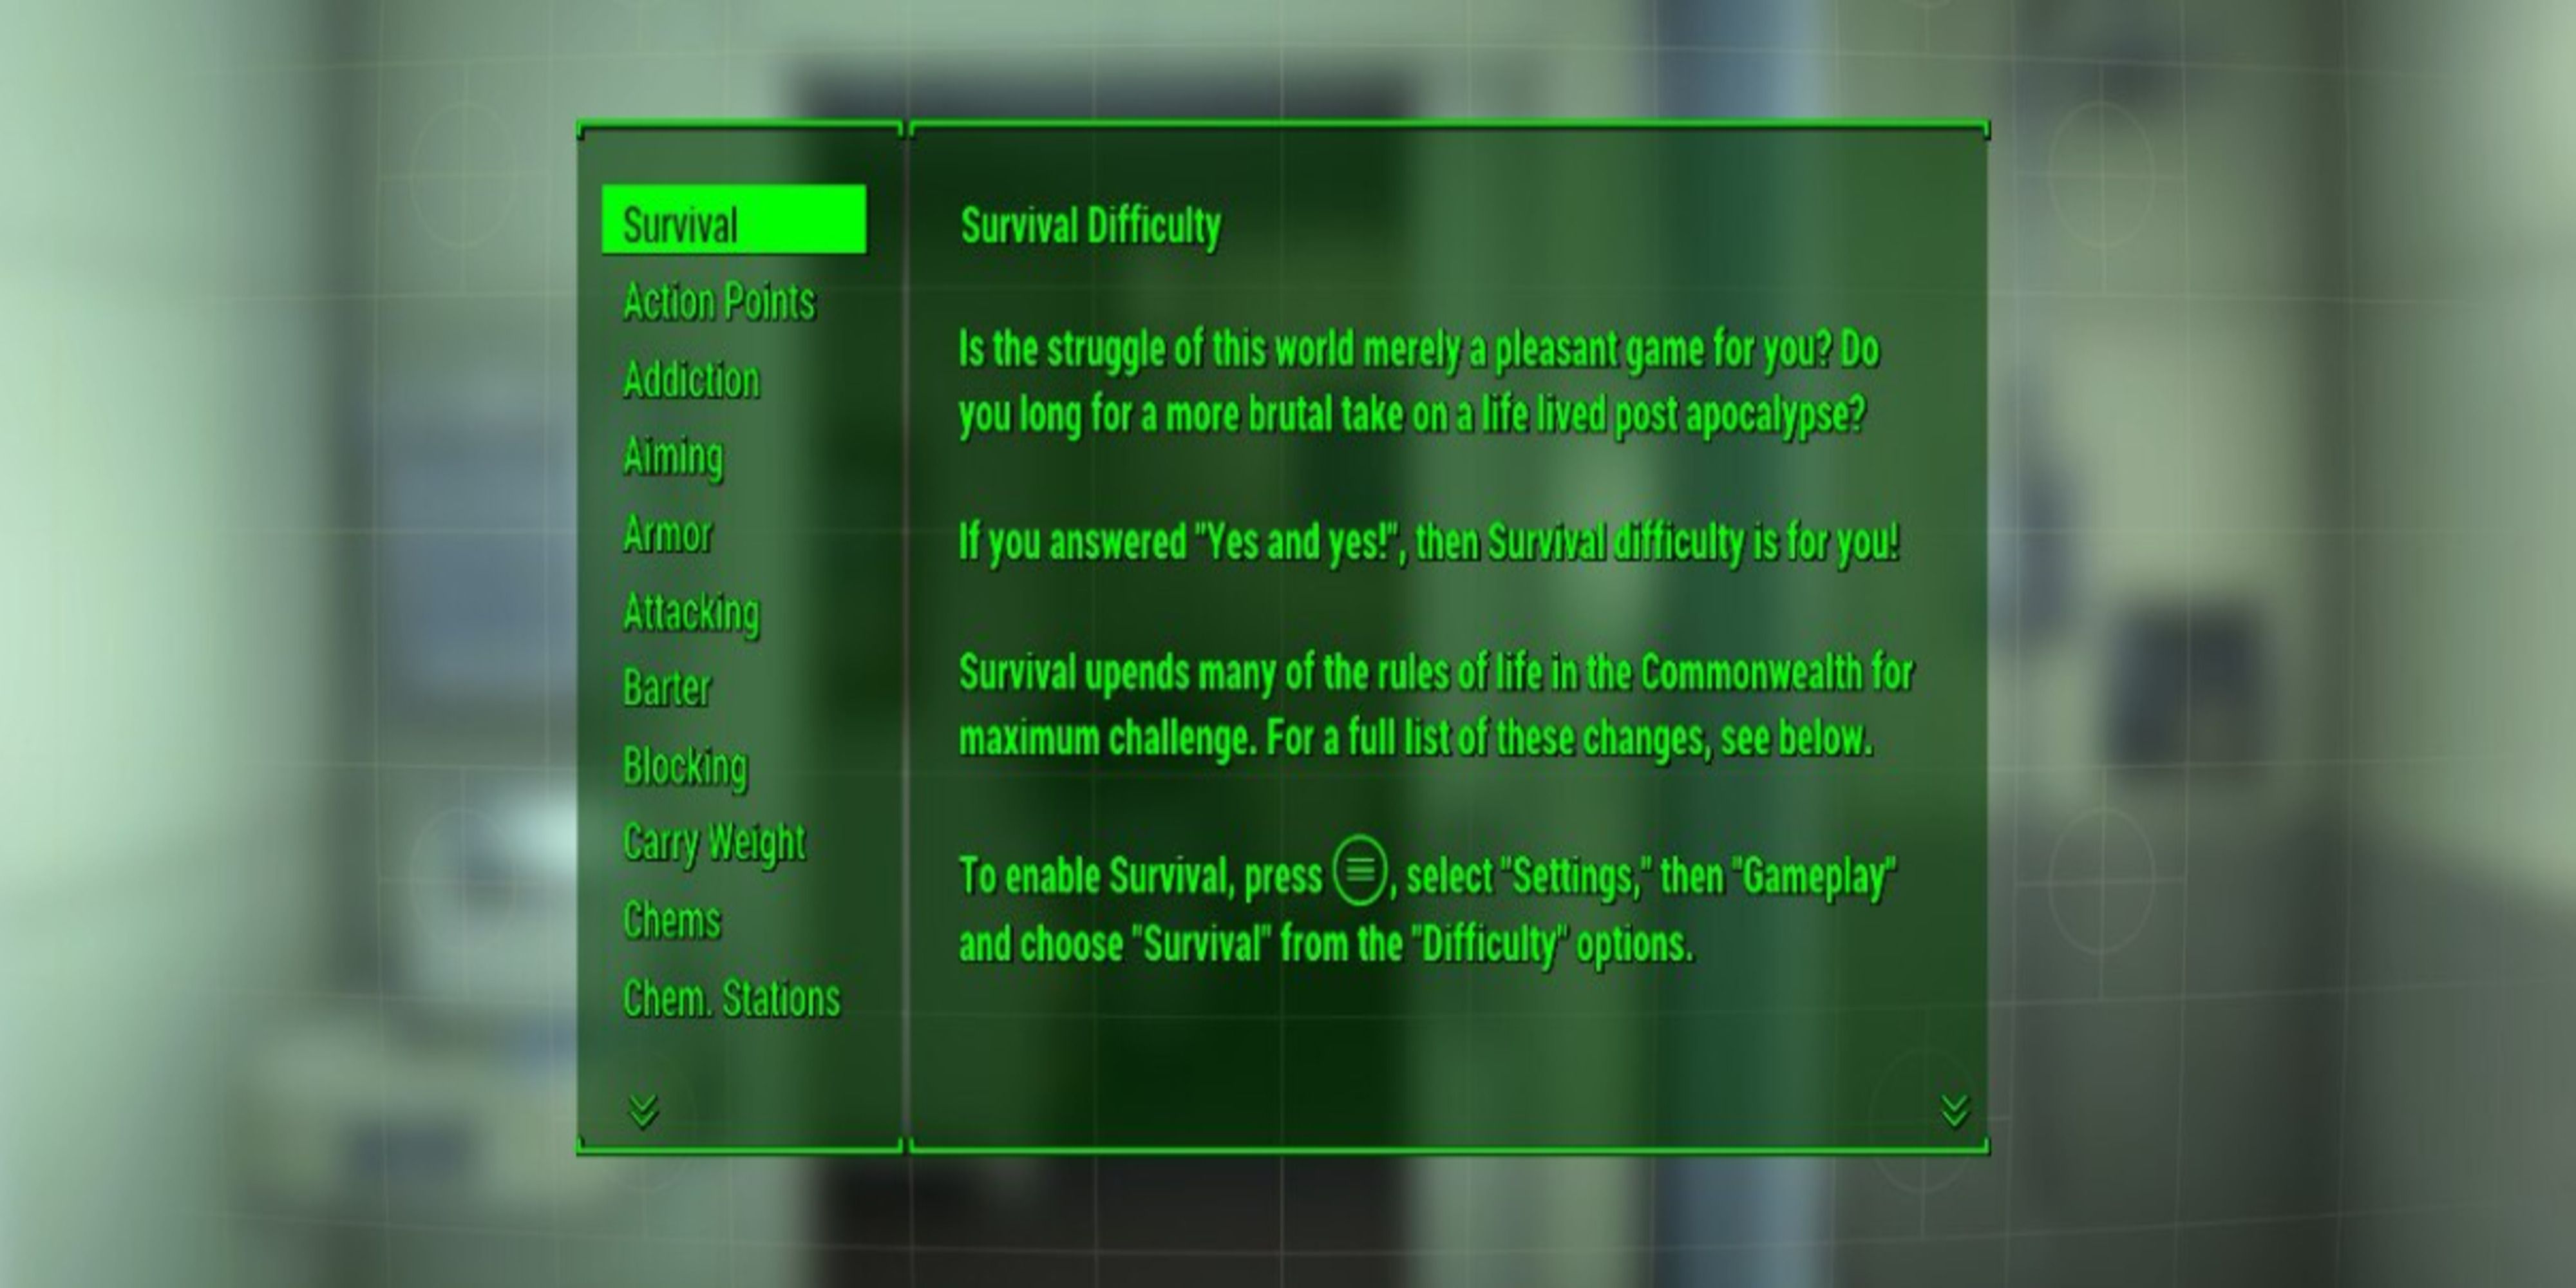 Reading the Survival difficulty setting in the help section of Fallout 4